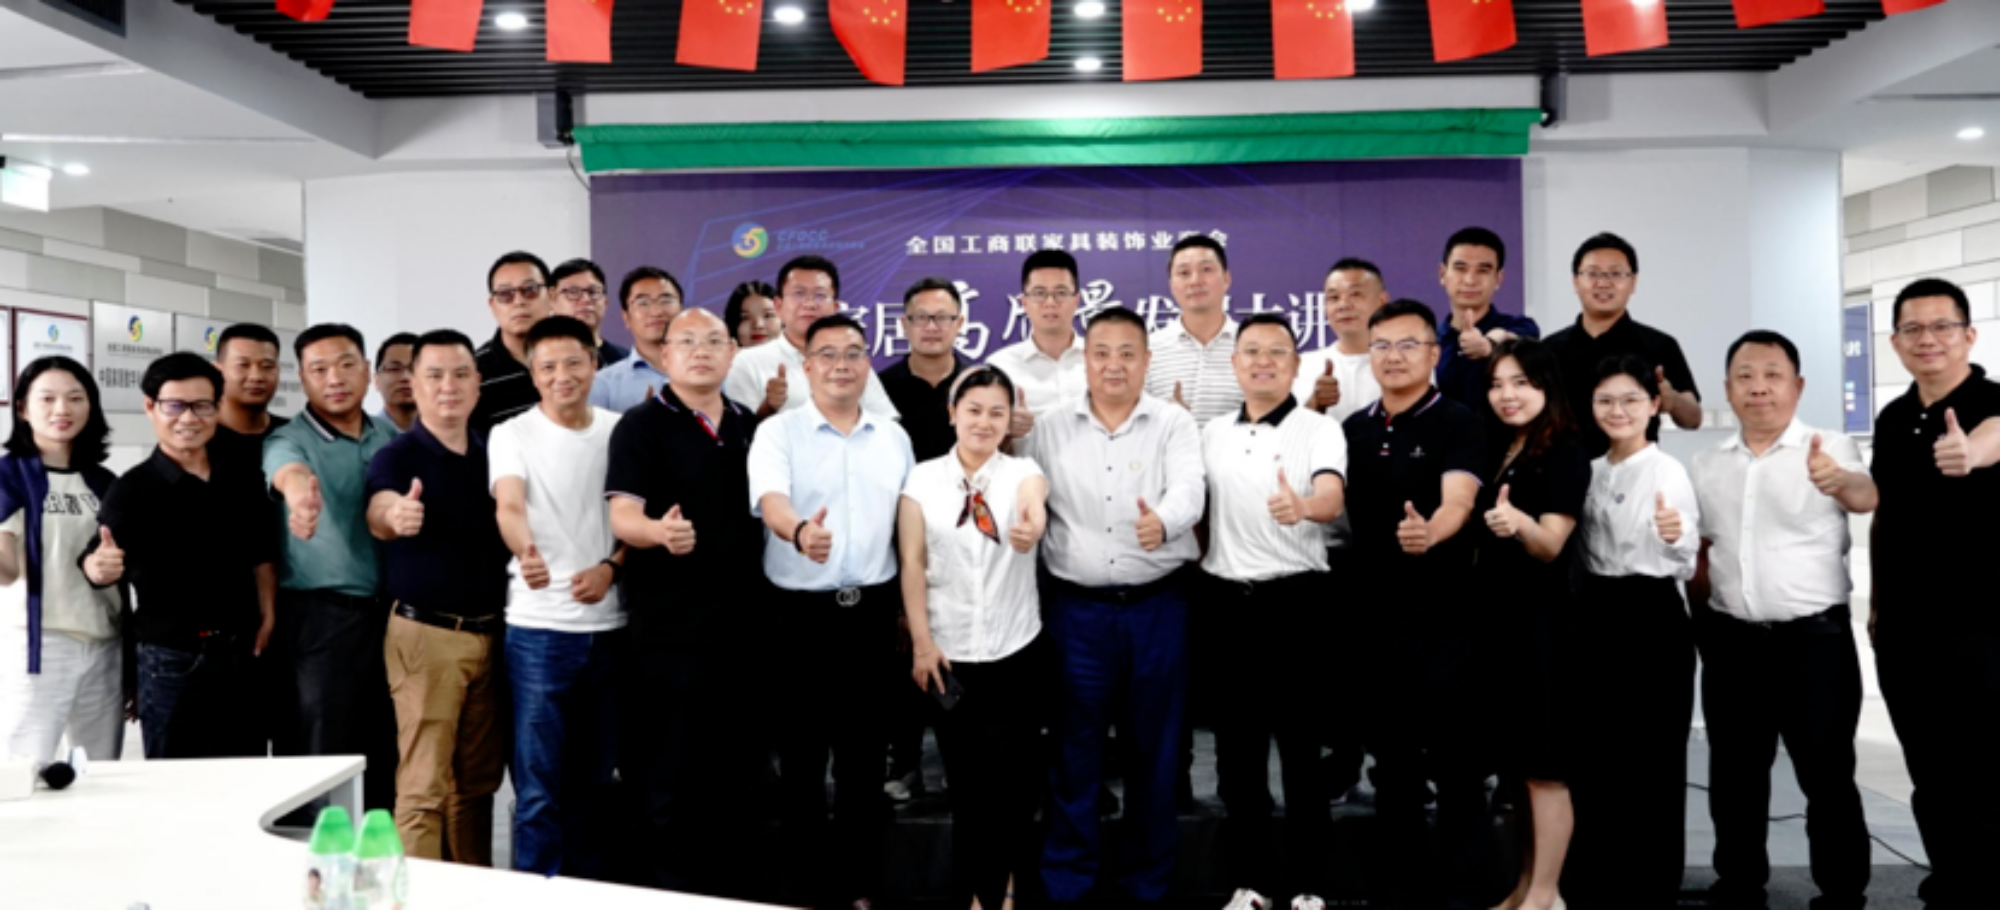 Empowering Enterprises, Cohering Development, China Home Furnishing High Quality Development Lecture Hall, Offline Salon Activity Phase 2, Held in Guangzhou